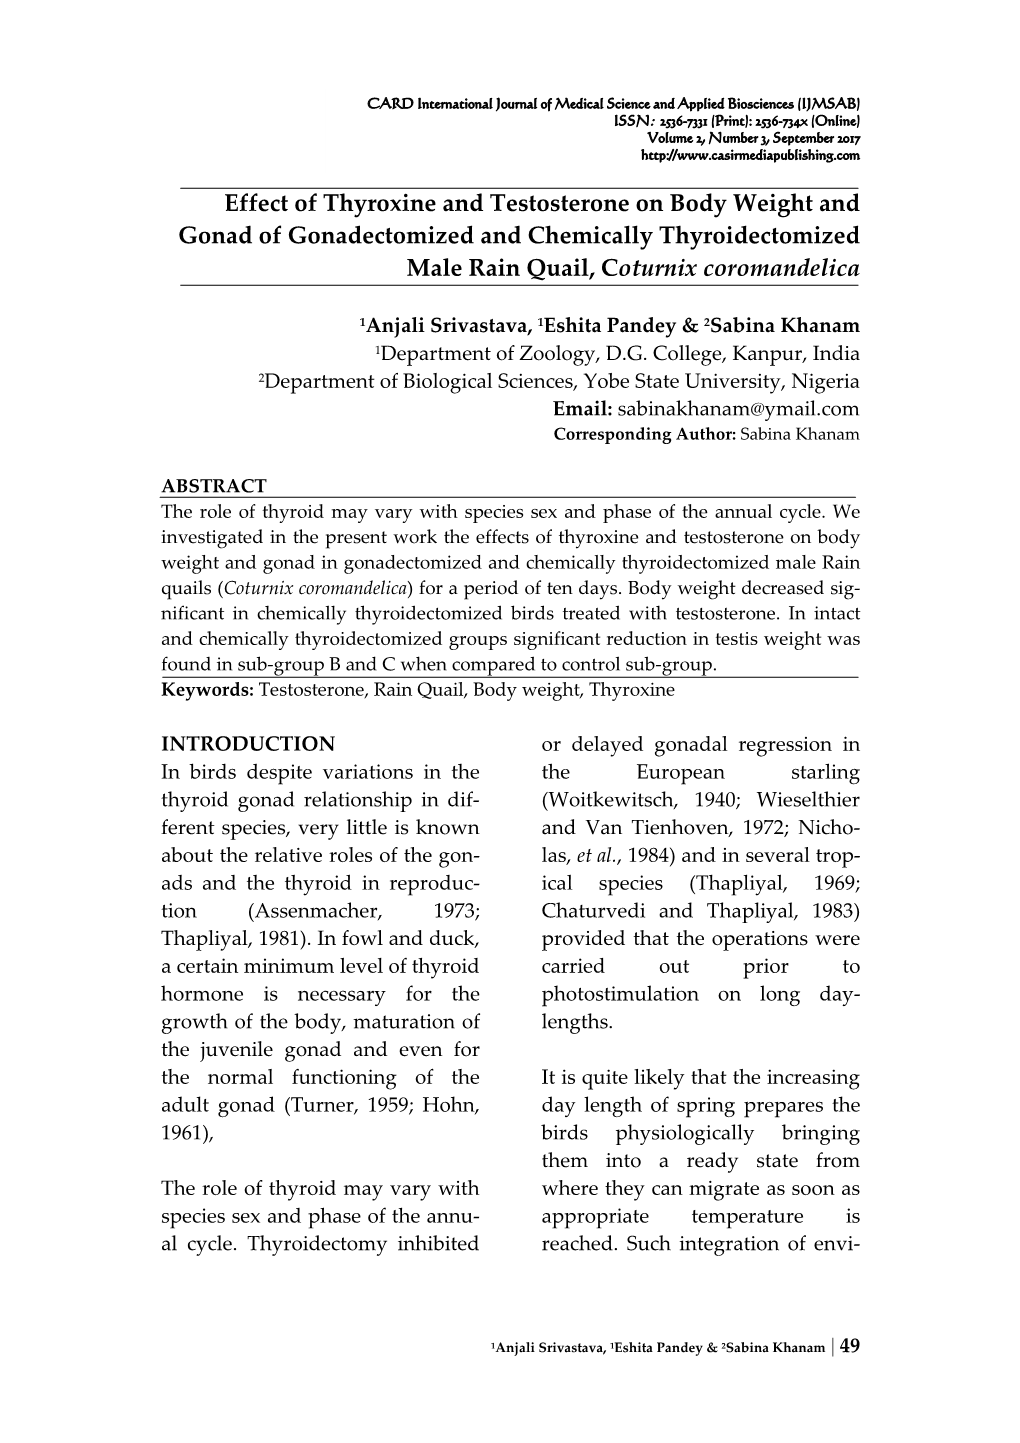 Effect of Thyroxine and Testosterone on Body Weight and Gonad of Gonadectomized and Chemically Thyroidectomized Male Rain Quail, Coturnix Coromandelica